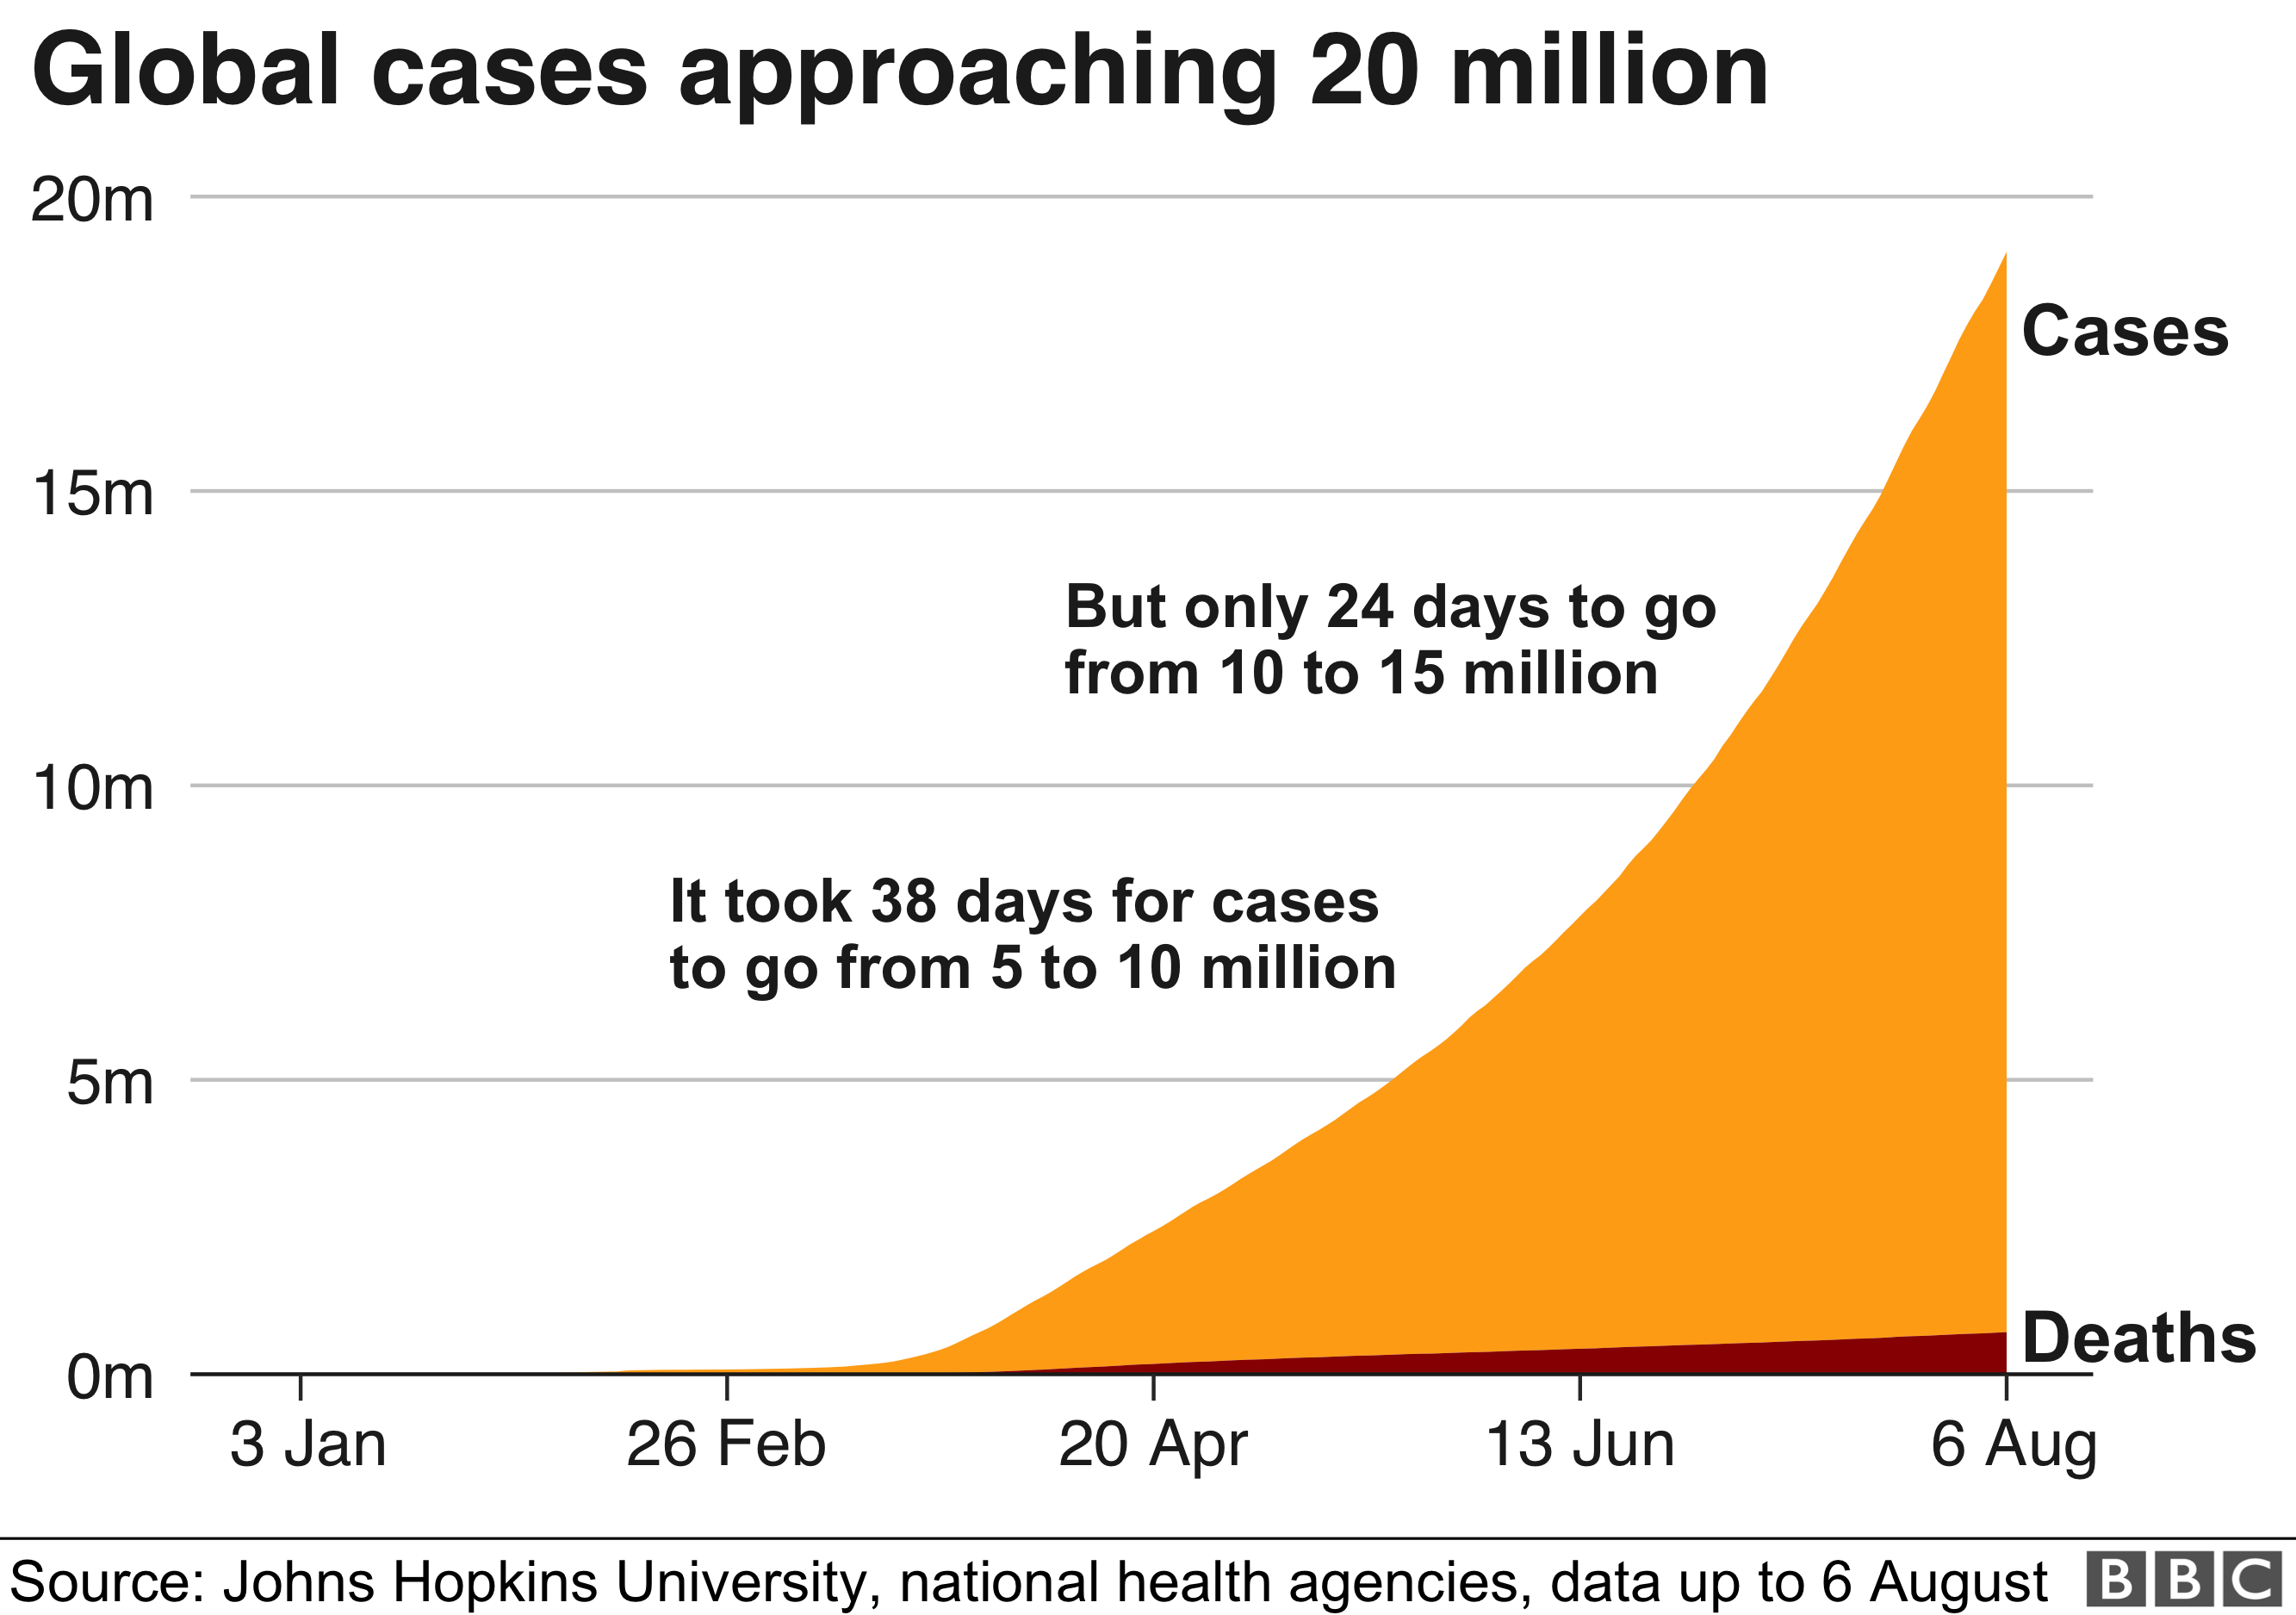 Area chart showing the number of global cases is fast approaching 20 million